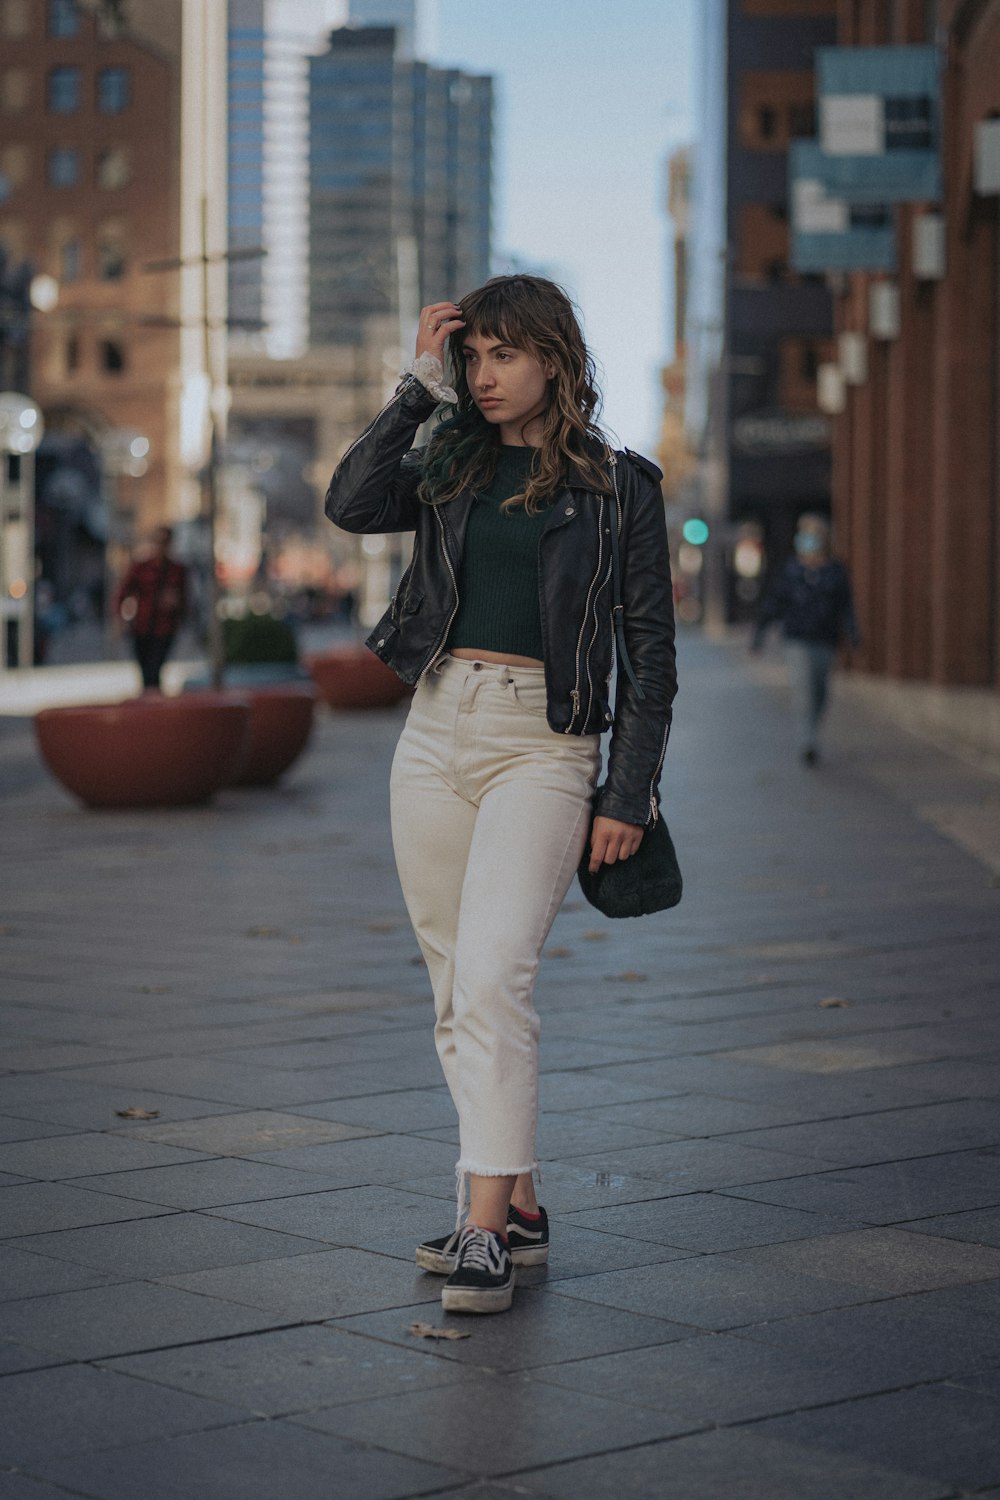 woman in black leather jacket and white pants standing on sidewalk during daytime